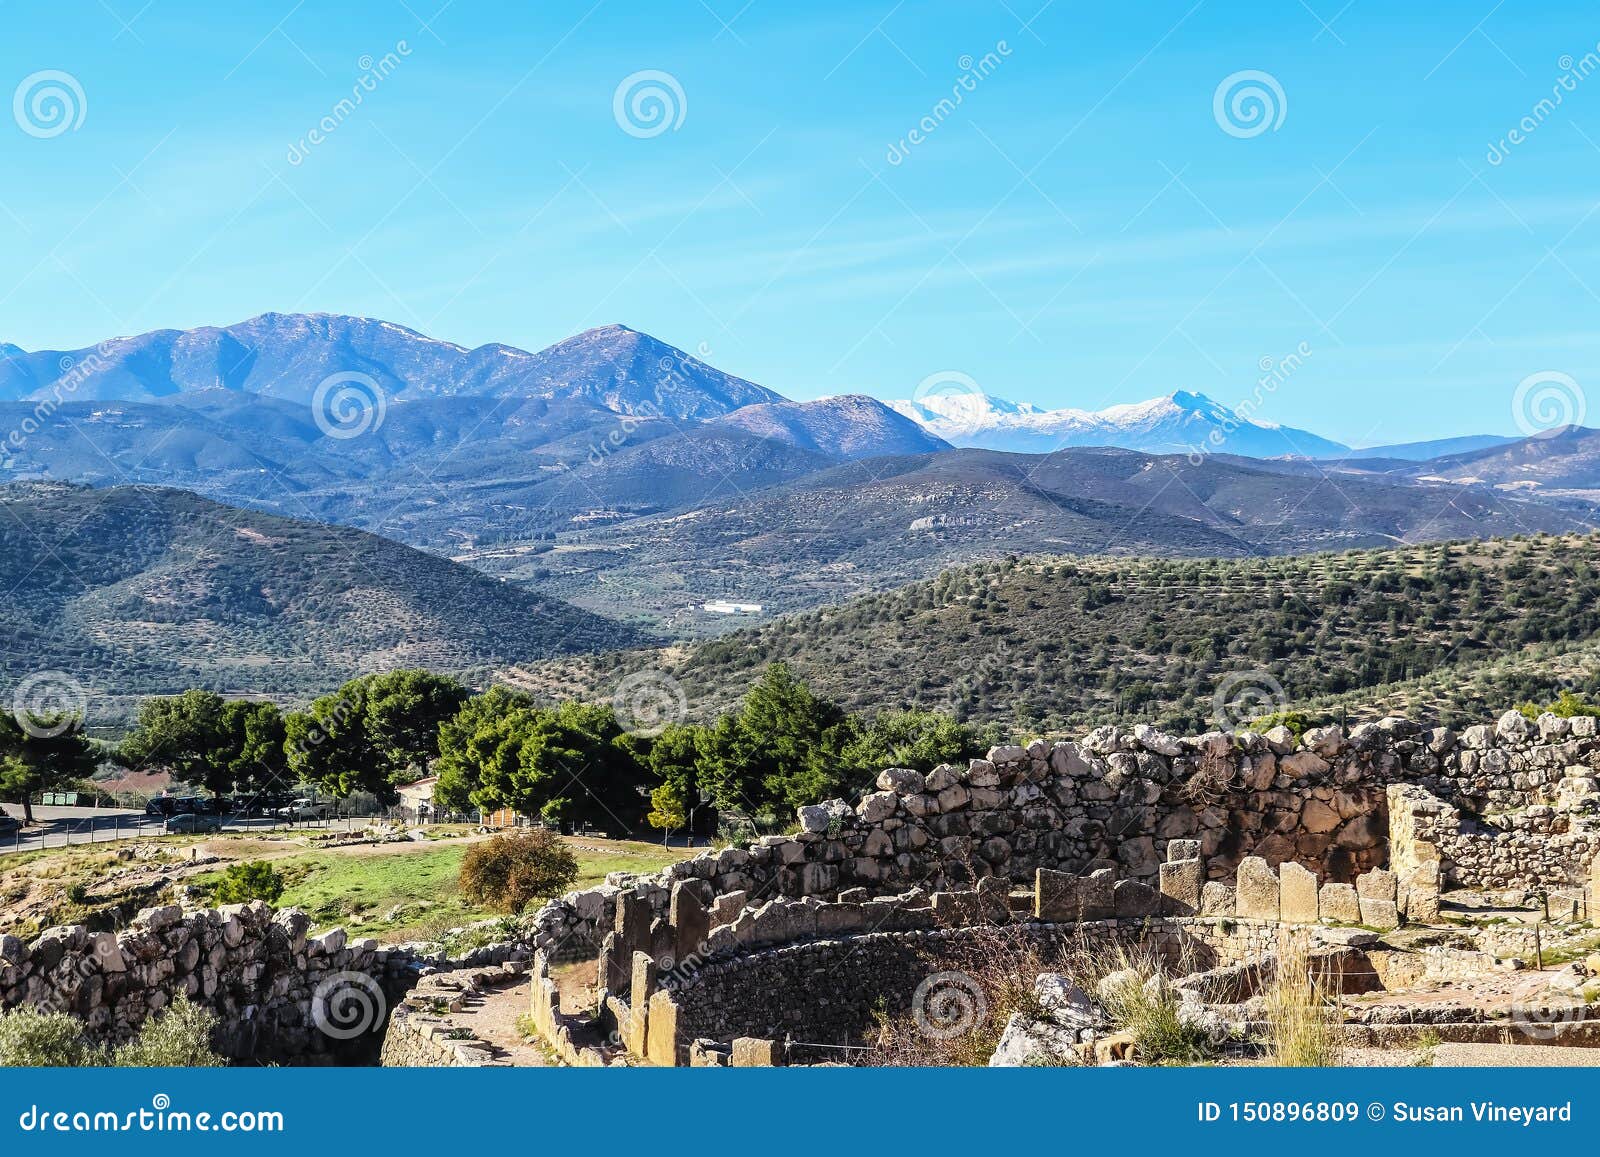 mighty ruins of ancient and well-built mycenae rich in gold - home of the mythical agamemnon synonymous with the names homer and